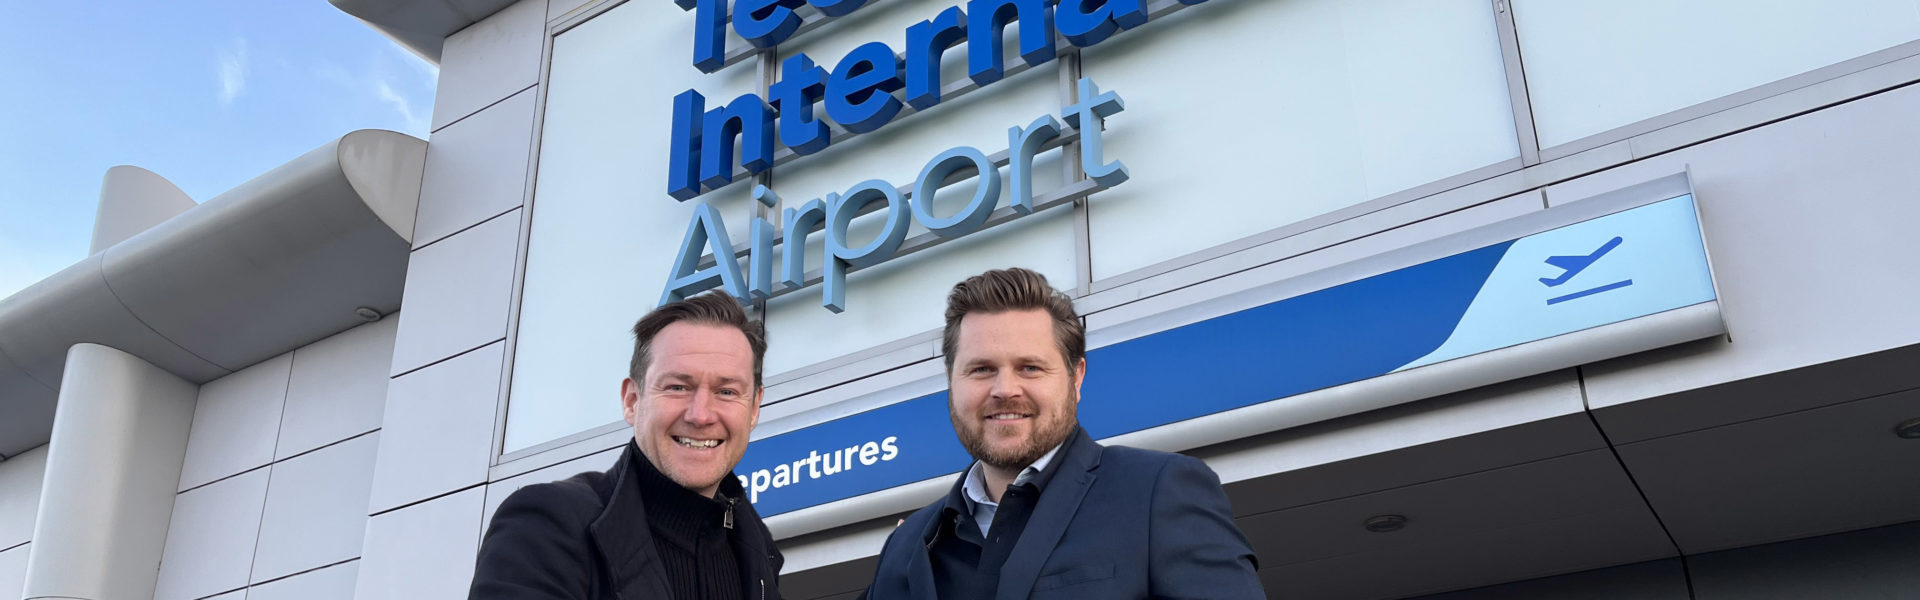 Teesside International Airport become a Chamber Patron